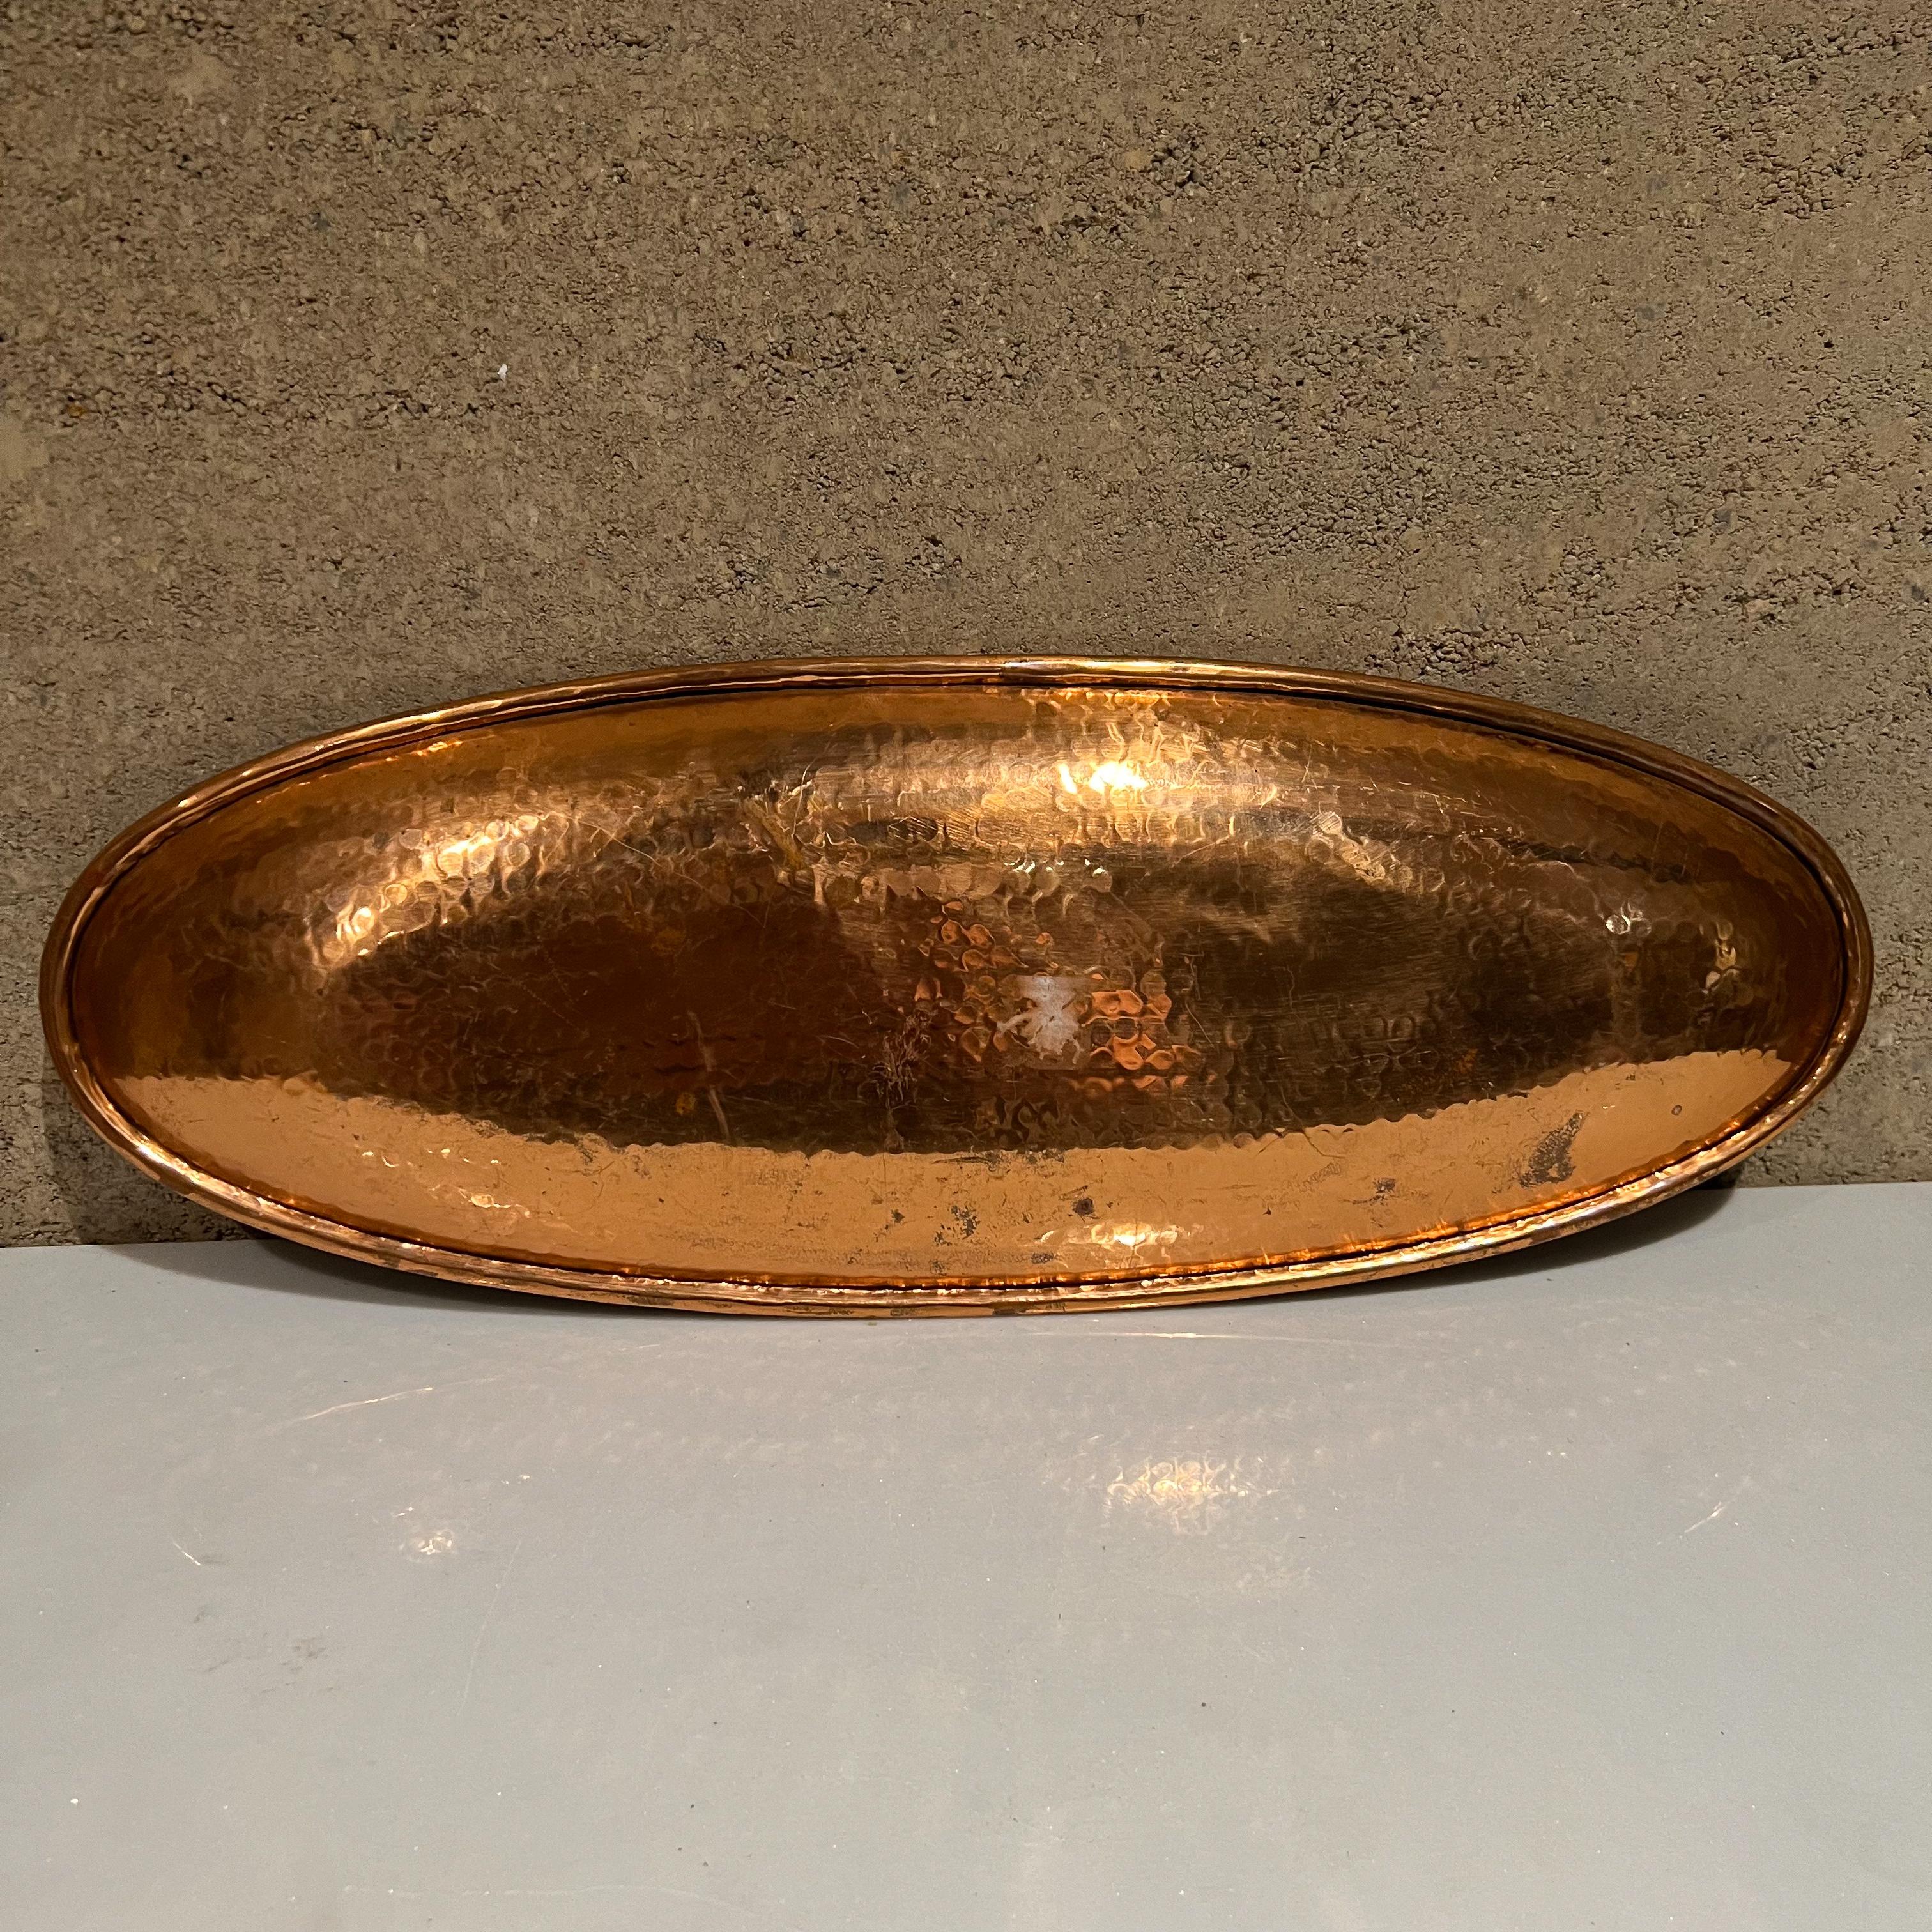 1970s Modern Hammered Copper Decorative Dish Serving Tray Oval Platter 1